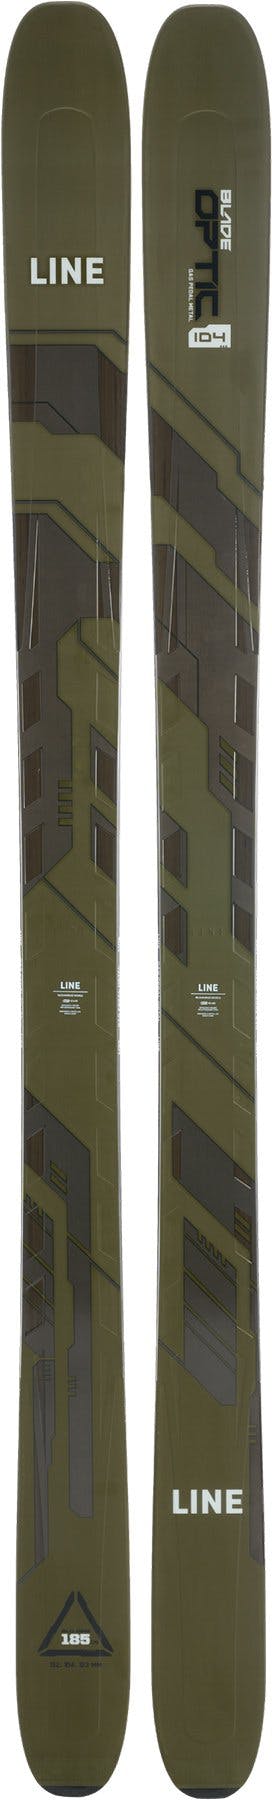 Product image for Blade Optic 104 Skis - Men's